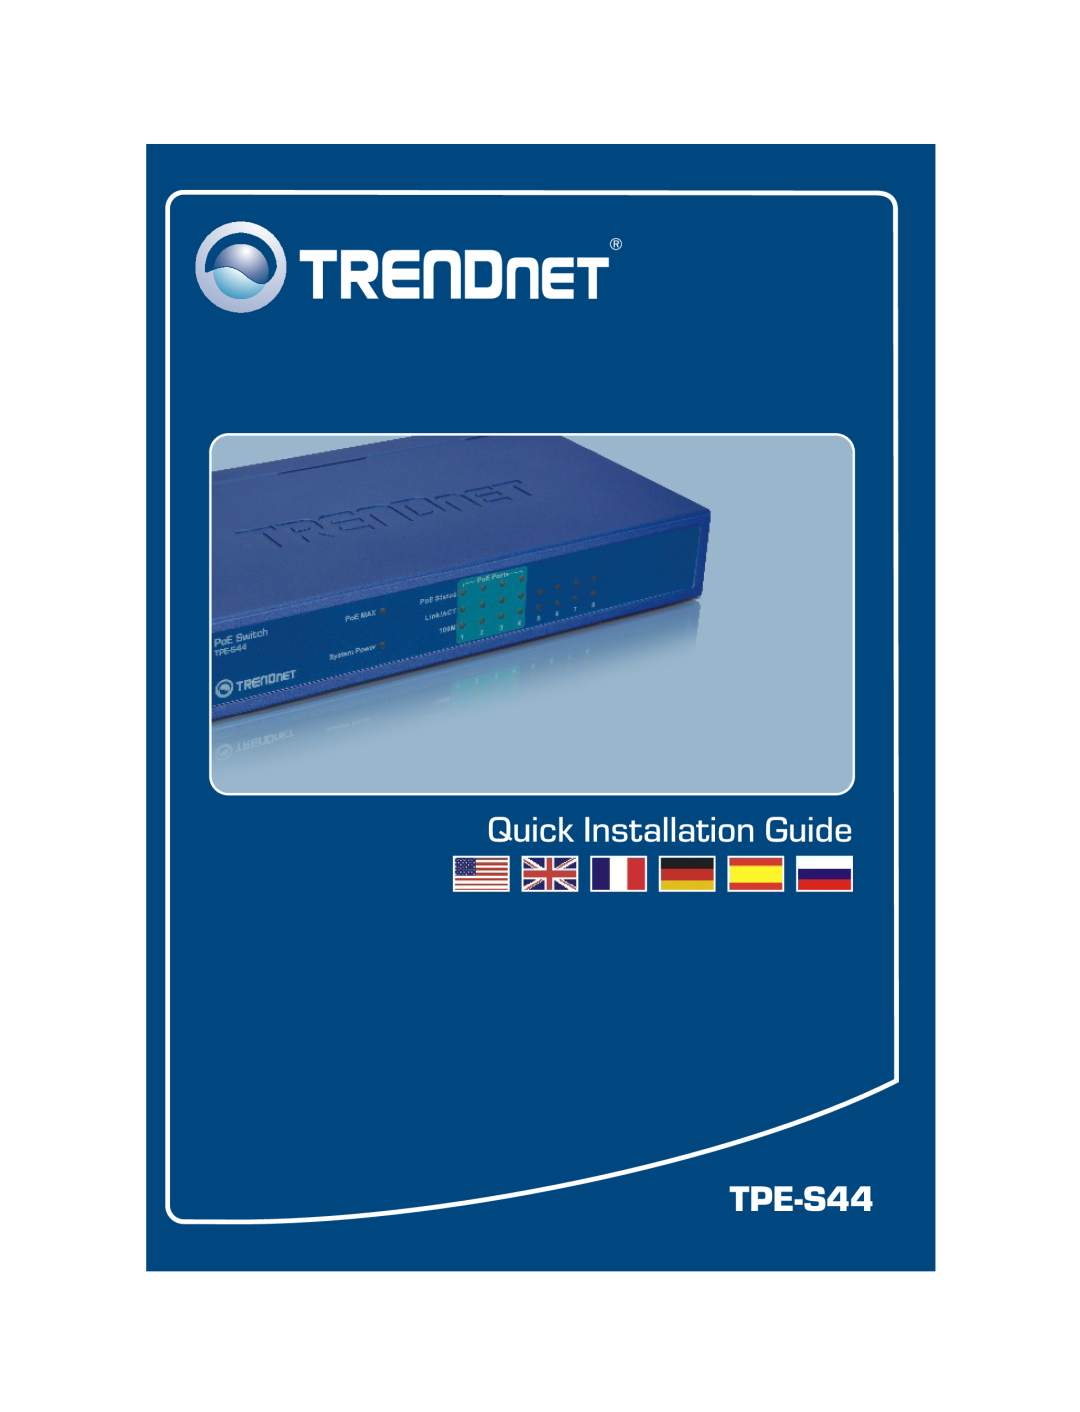 TRENDnet TPE-S44 manual Quick Installation Guide 